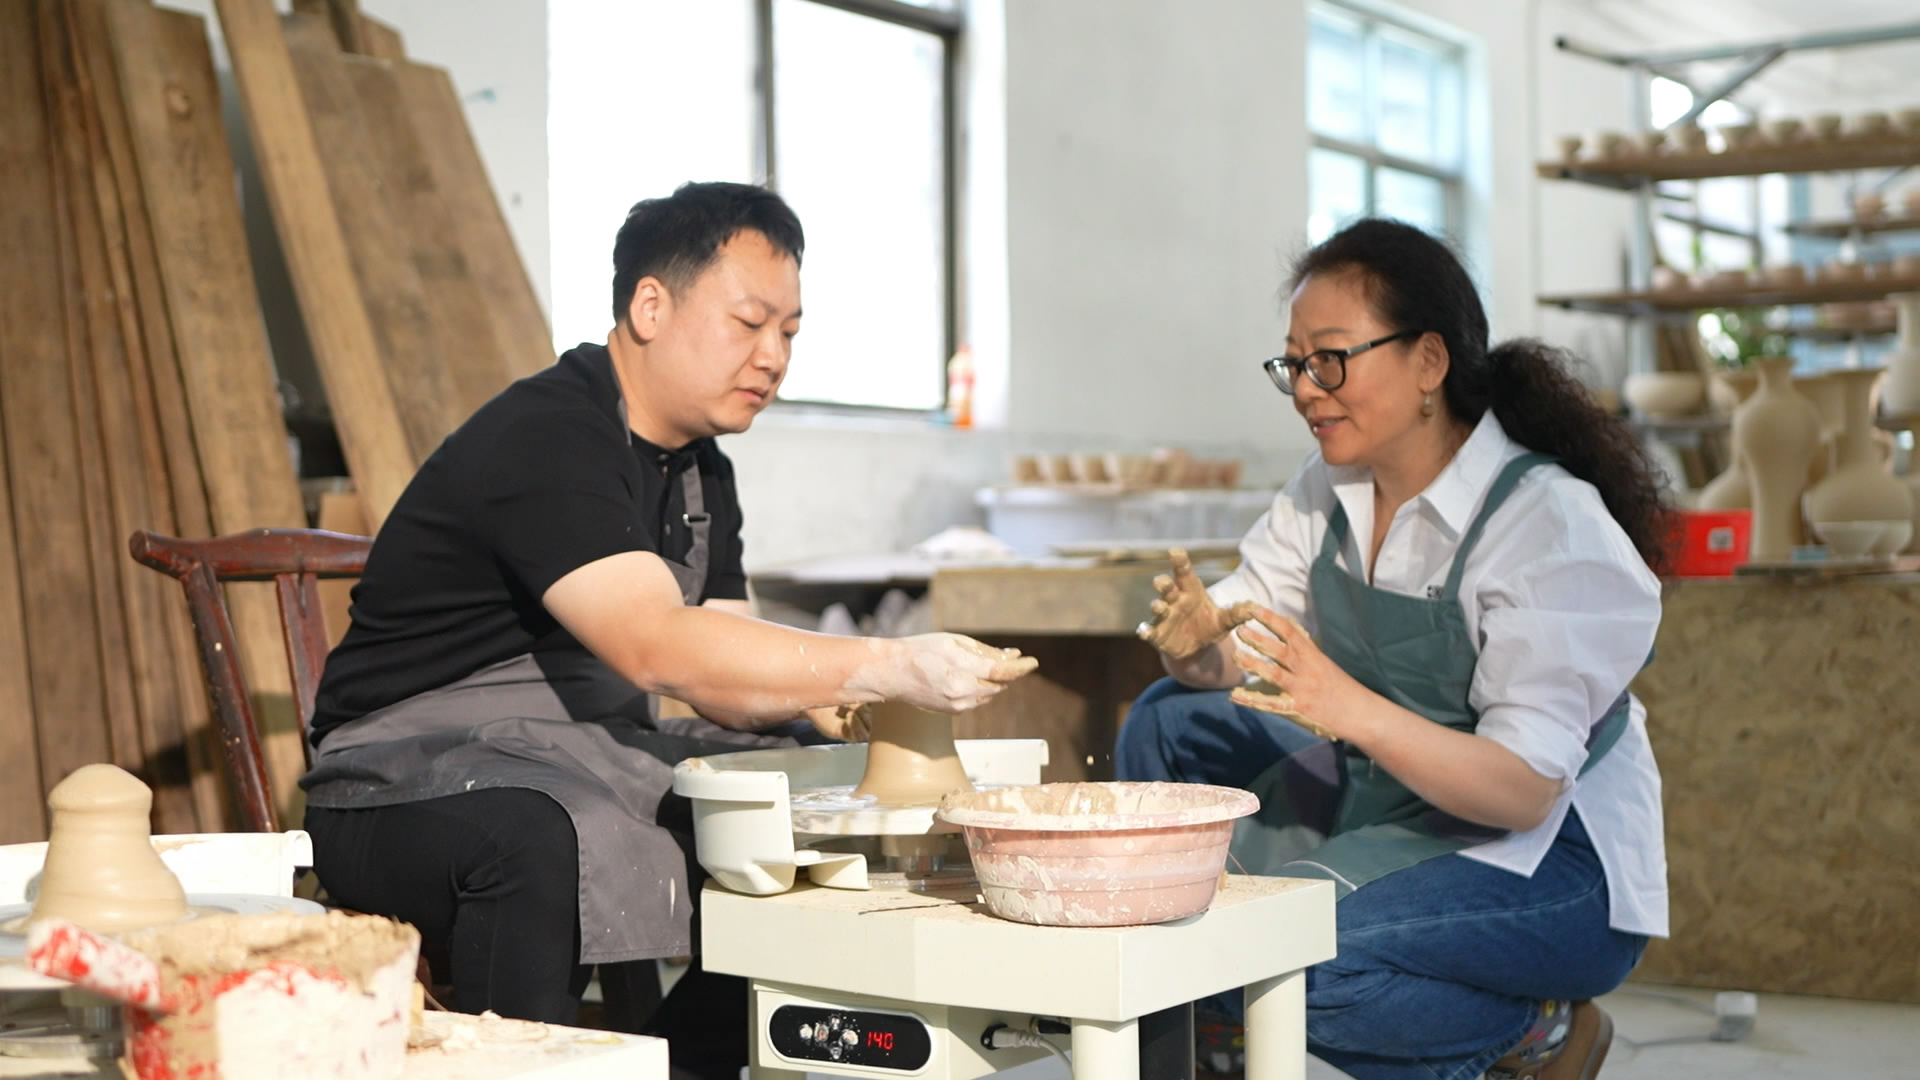 CGTN reporter Qi Jie has her first attempt at making pottery. /CGTN